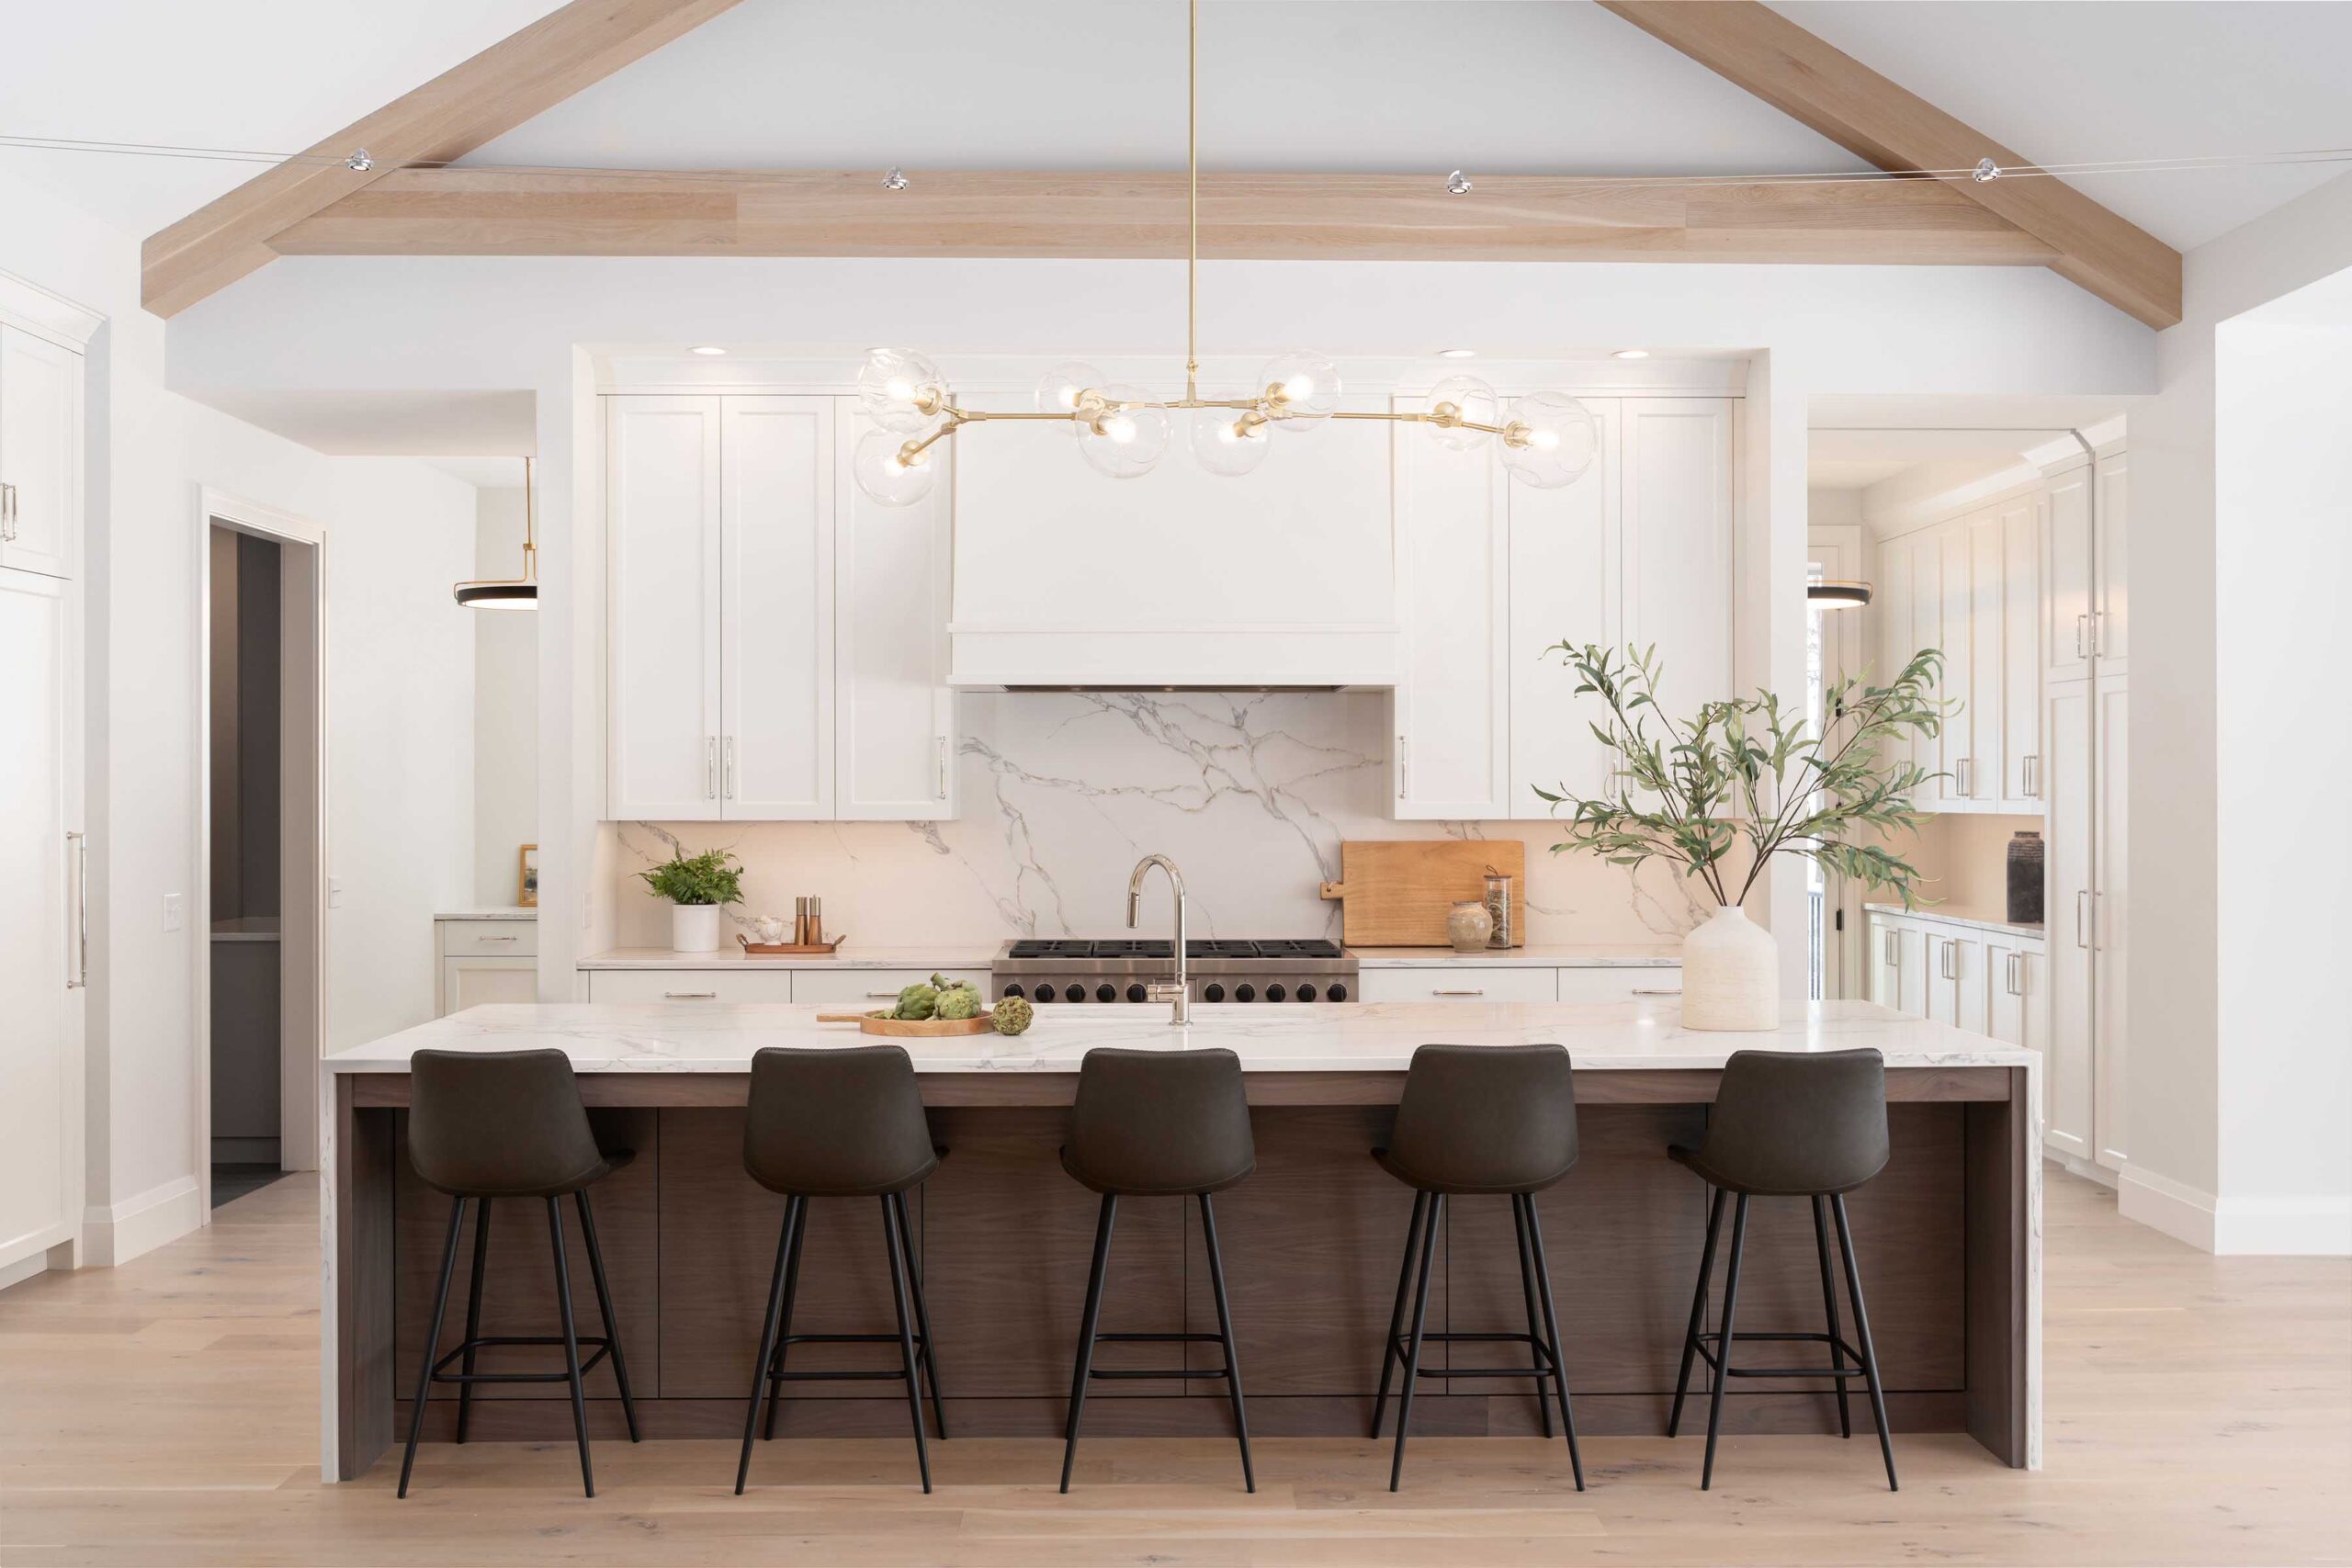 A white kitchen with wooden beams and black stools.